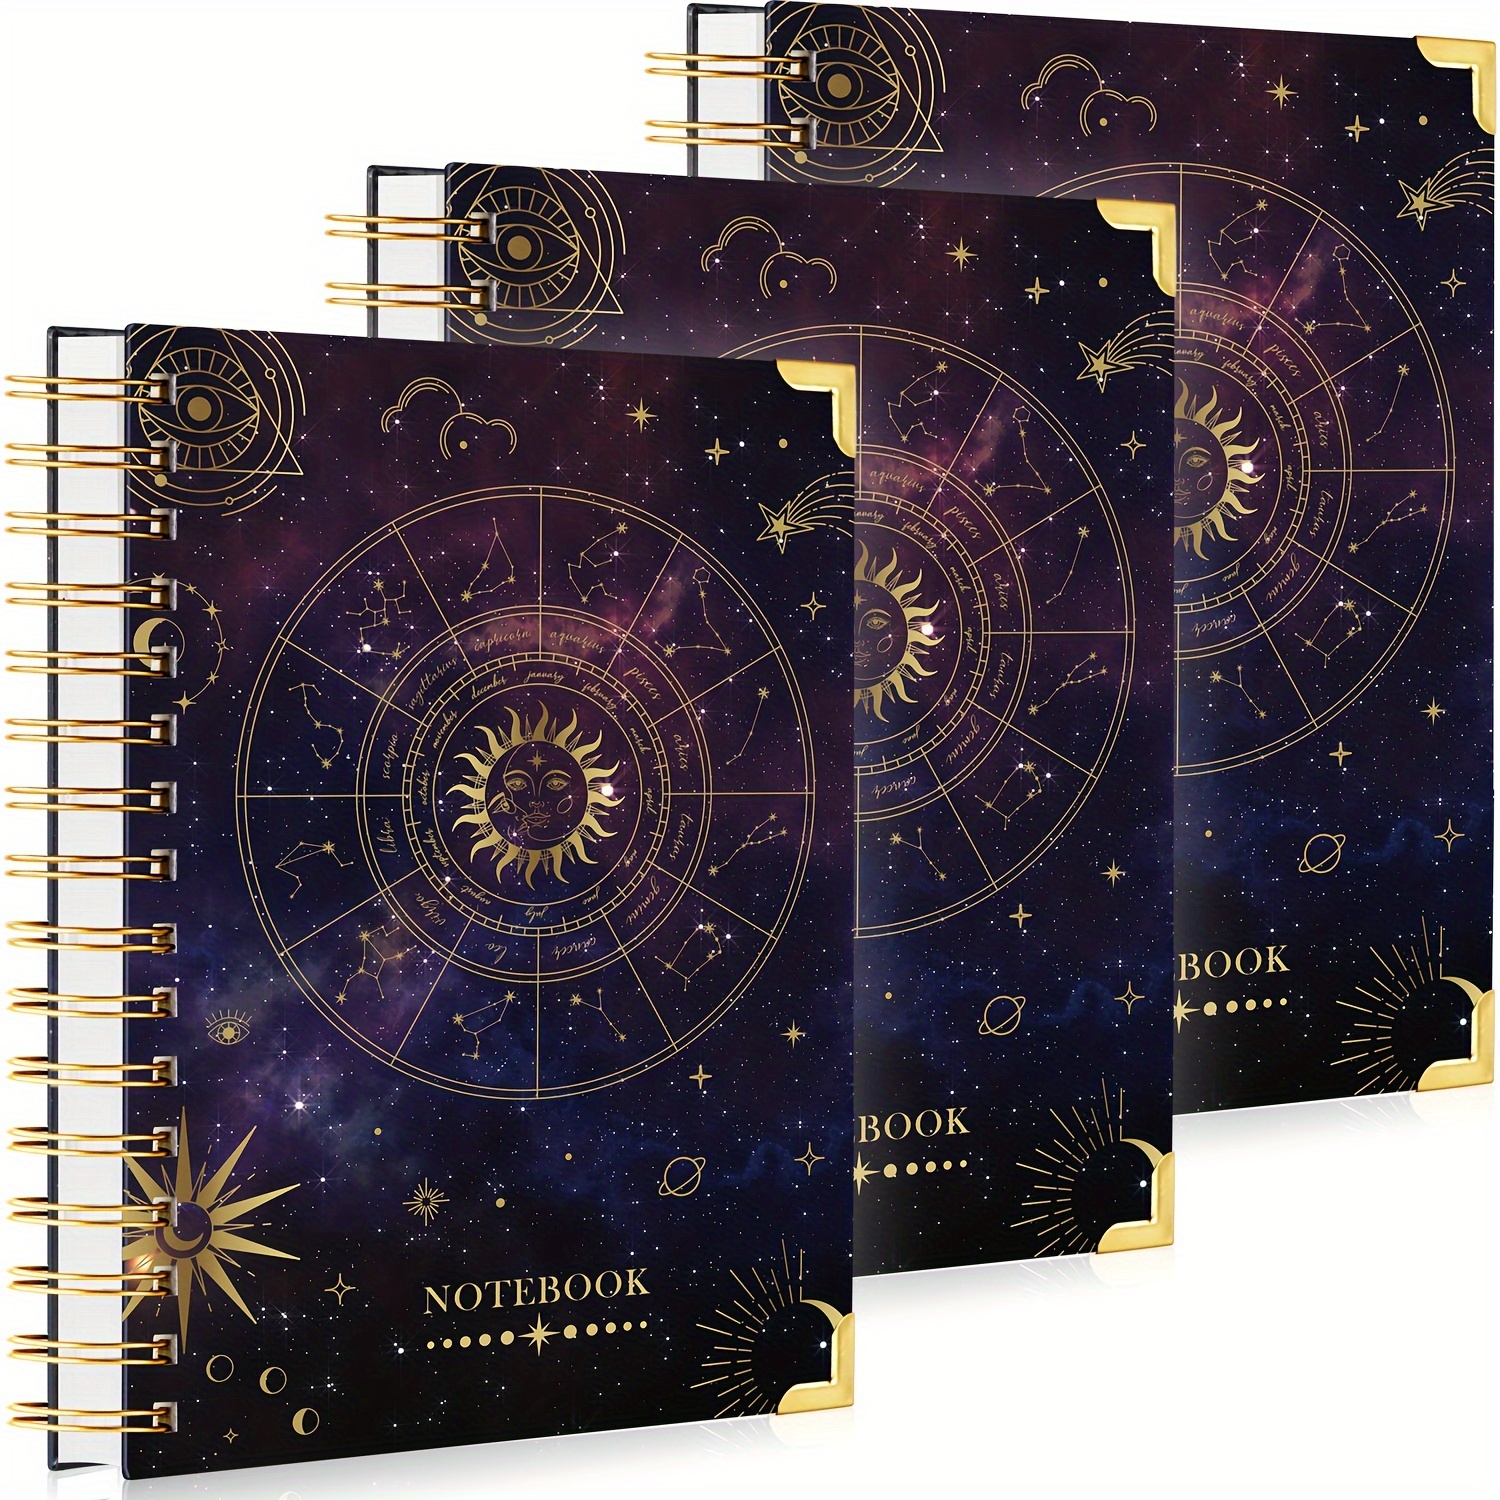 

3 Pack Spiral Journal Notebook, Hardcover Aesthetic Journal For Women, A5 Lined Dotted Paper Journal, Astrology Cover, Gifts For Women Girls, 240 Pages 100gsm Thick Paper, 5.8 X 8.4 In